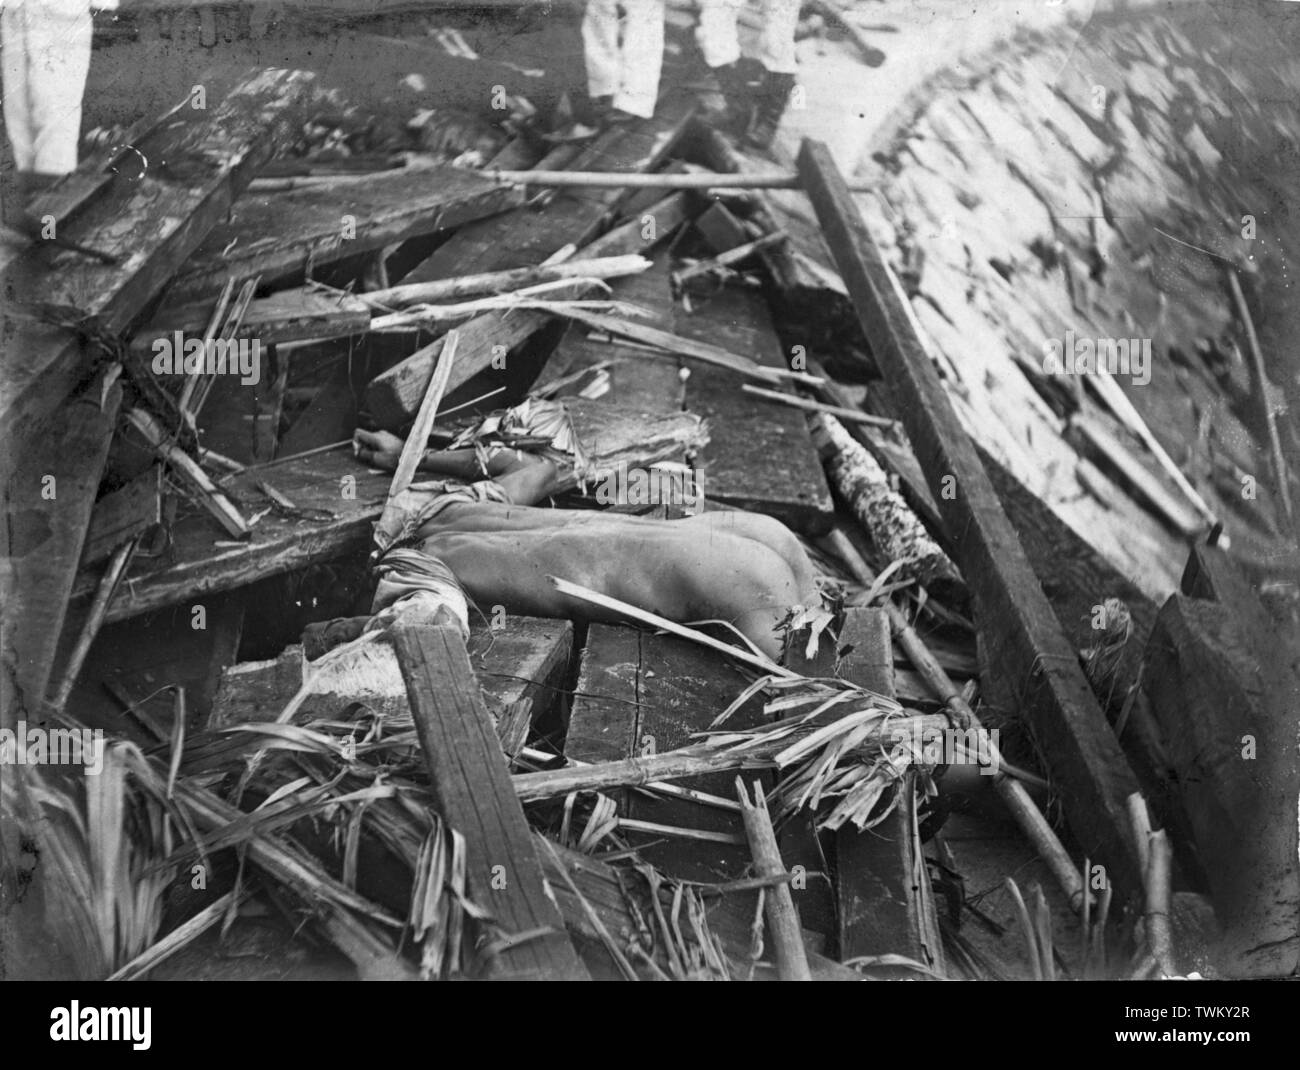 A body amongst the wreckage in the aftermath of the 1906 Hong Kong typhoon, 18 September 1906. Up to 10,000 people lost their lives with exception damage caused across the harbour and shorelines in the British Crown Colony. Photo by Tony Henshaw Stock Photo